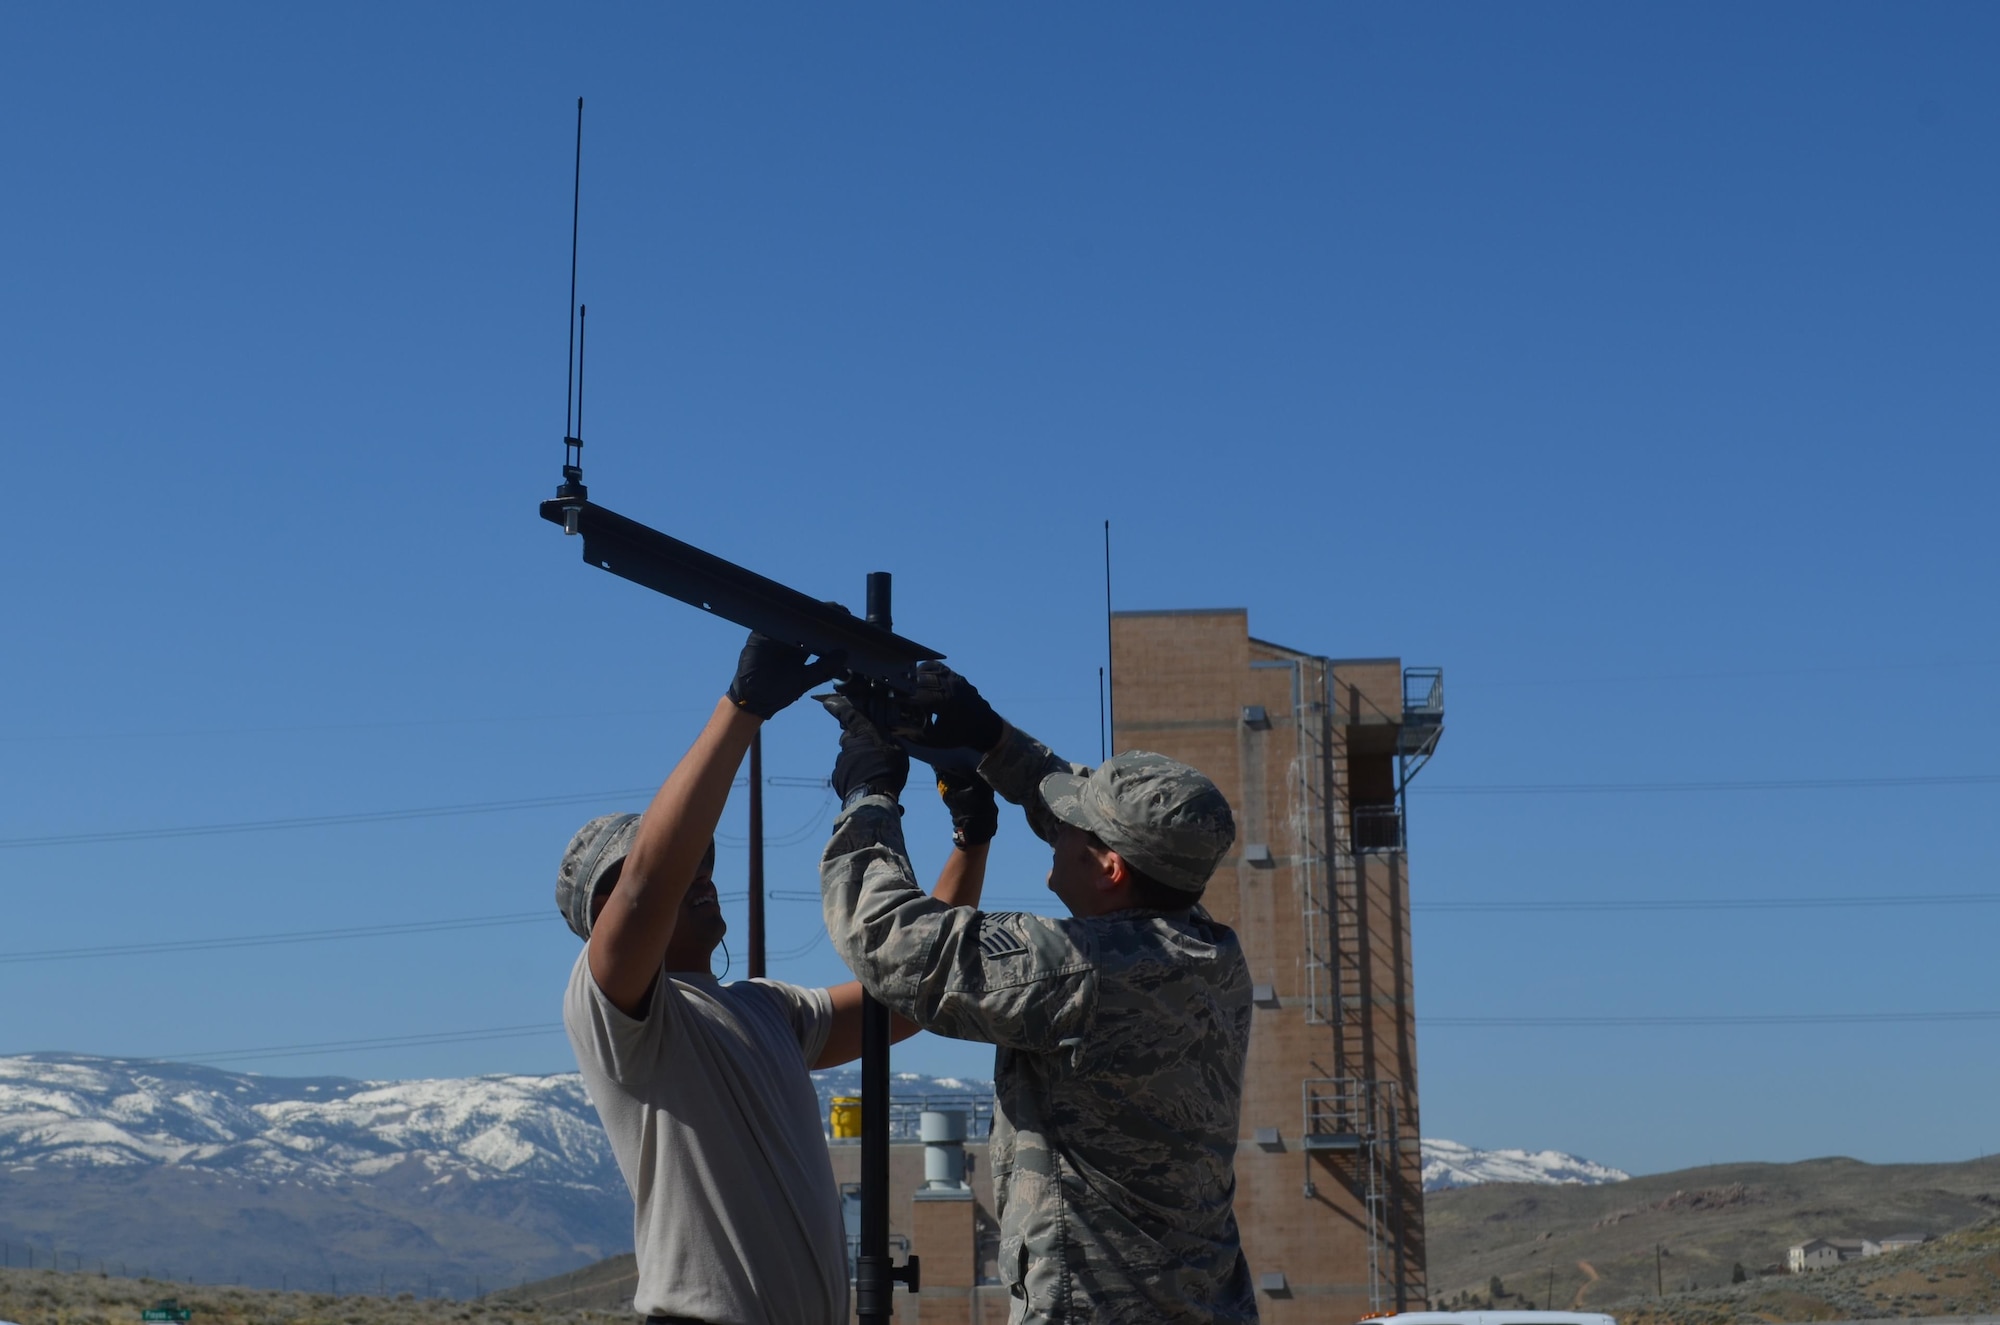 Two Nevada Air National Guard Joint Incident Site Communications Capability (JISCC) members, Senior Airman David Almada (right) and Staff Sgt. Jesse Lemos assemble an antenna mast at the Regional Public Safety Training Center in Reno, Nevada, during the 2017 practice exercise. The team, along with the Nevada Air National Guard’s CBRNE (Chemical, Biological, Radiological, Nuclear and High Yield Explosive) Enhanced Response Force Package (CERFP) will have their annual ExEval inspection in June.